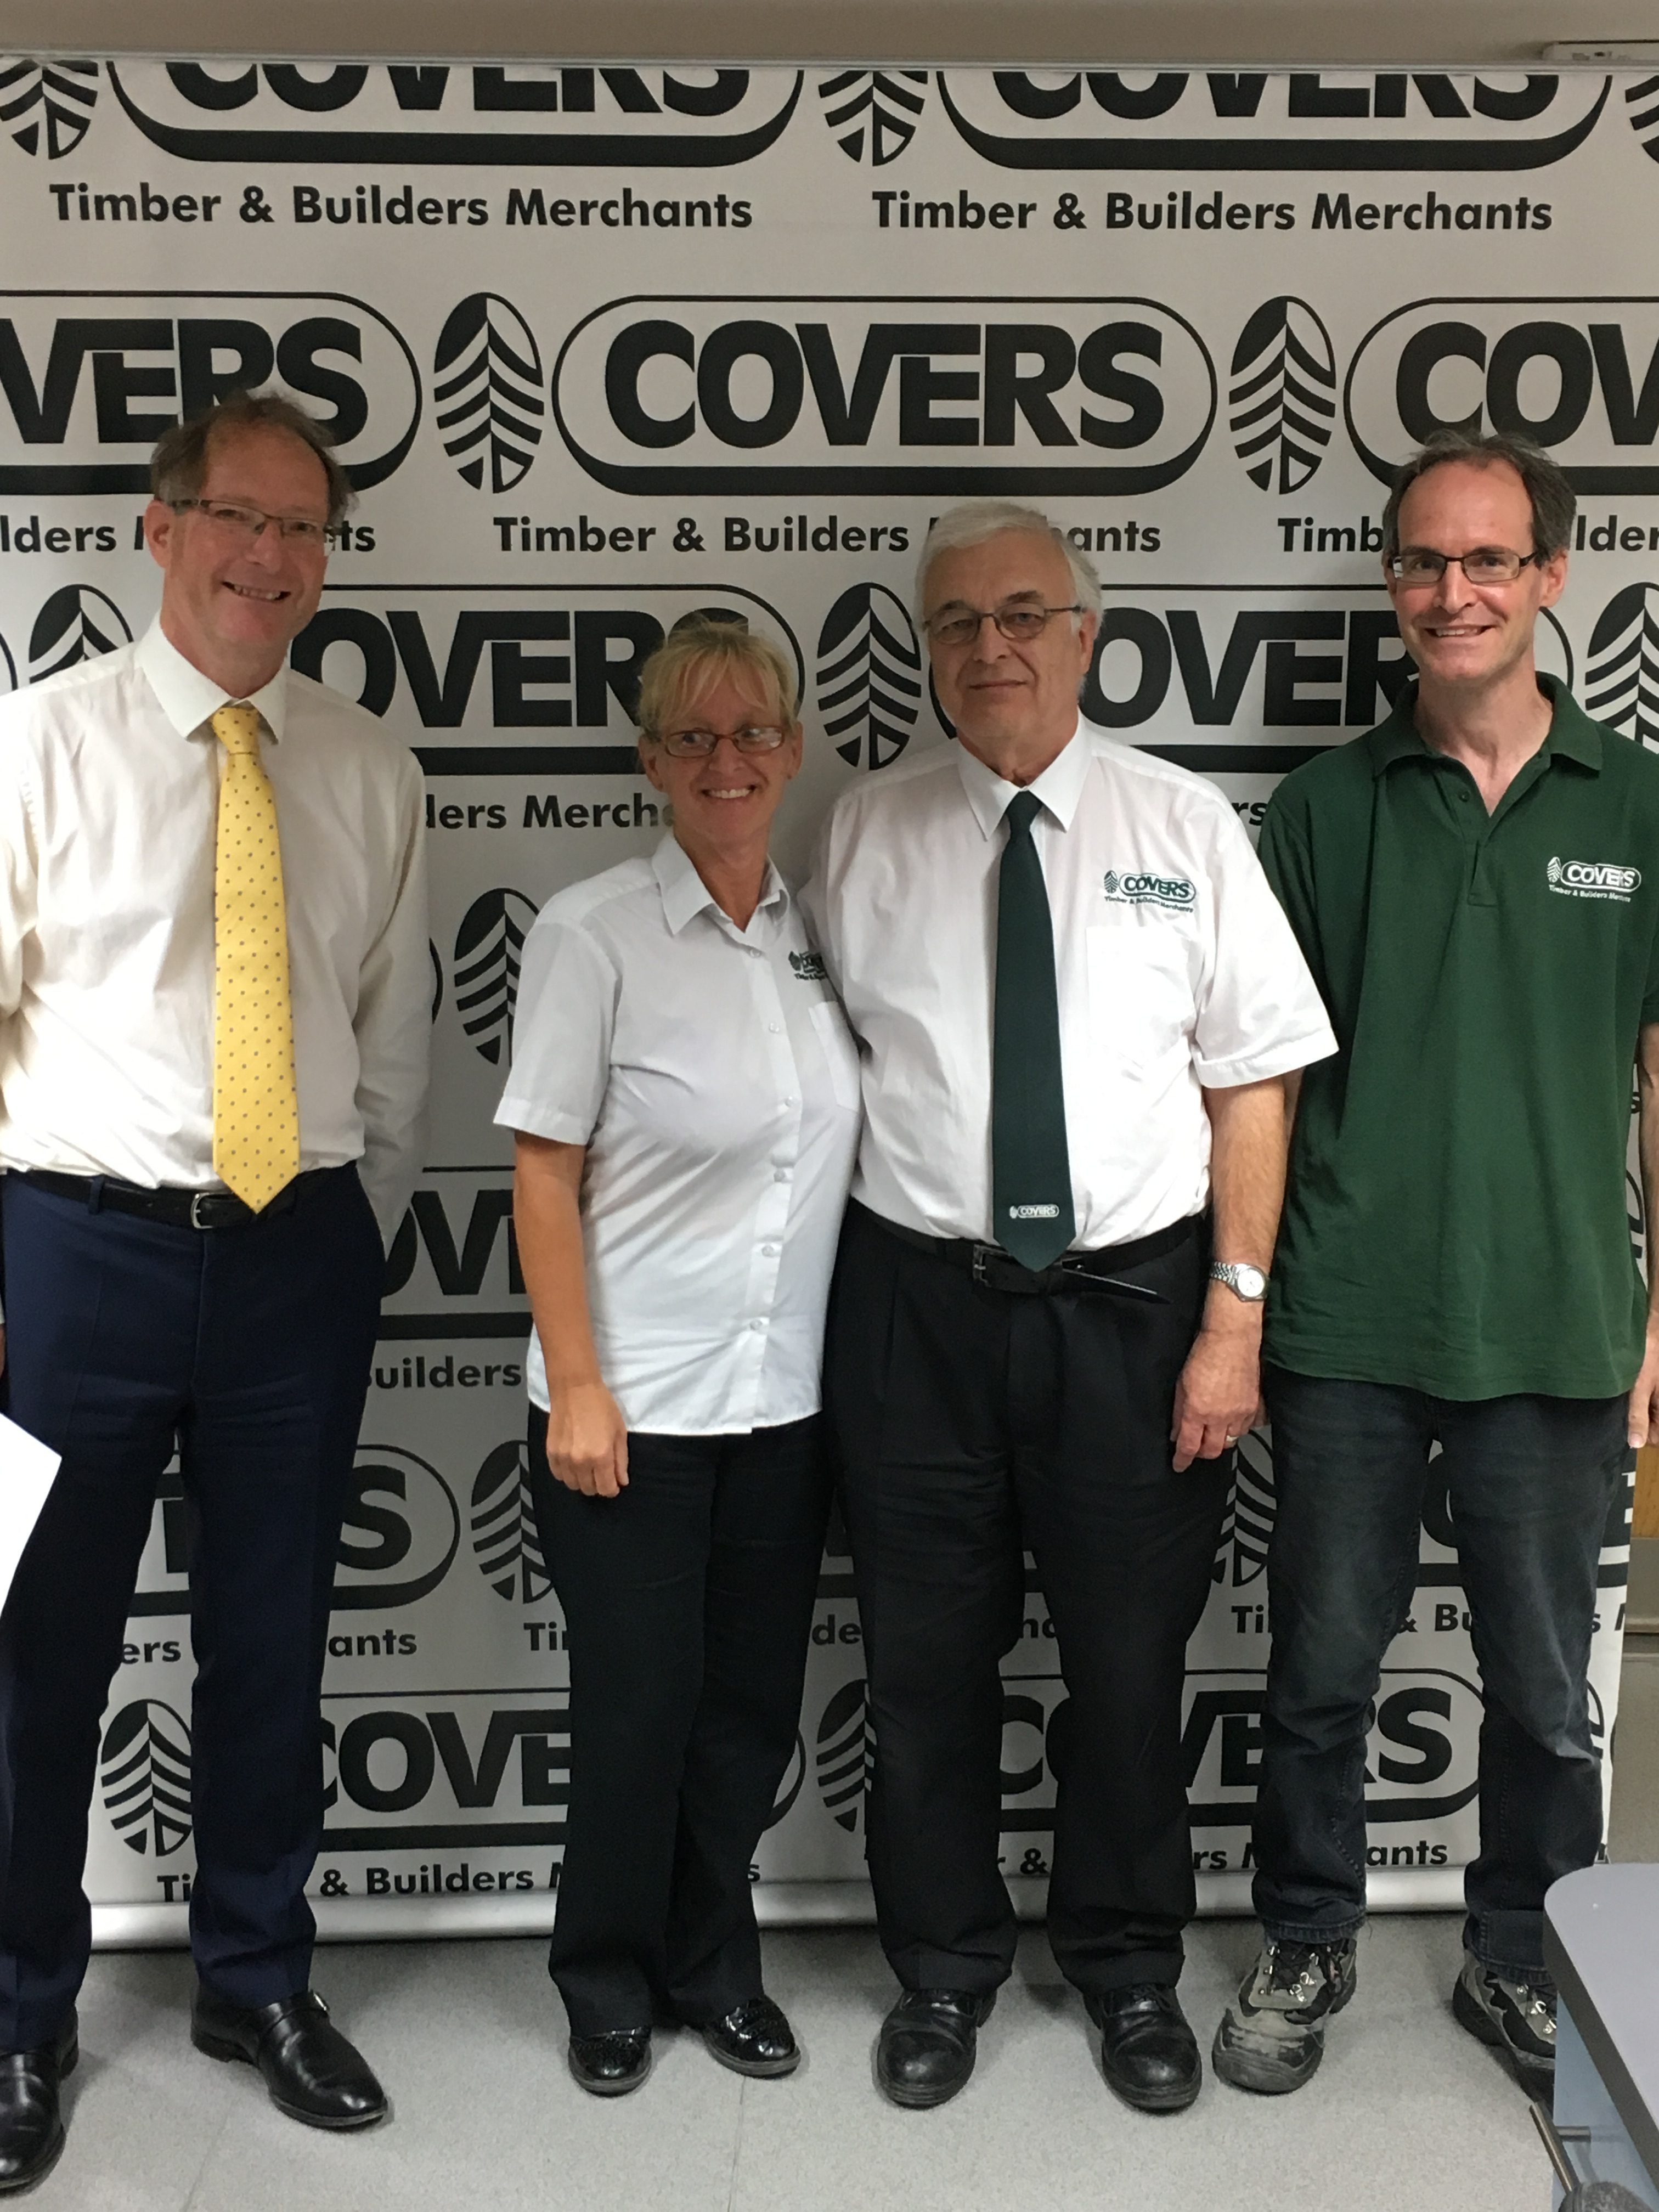 Covers Lewes employees celebrate 90 years of service